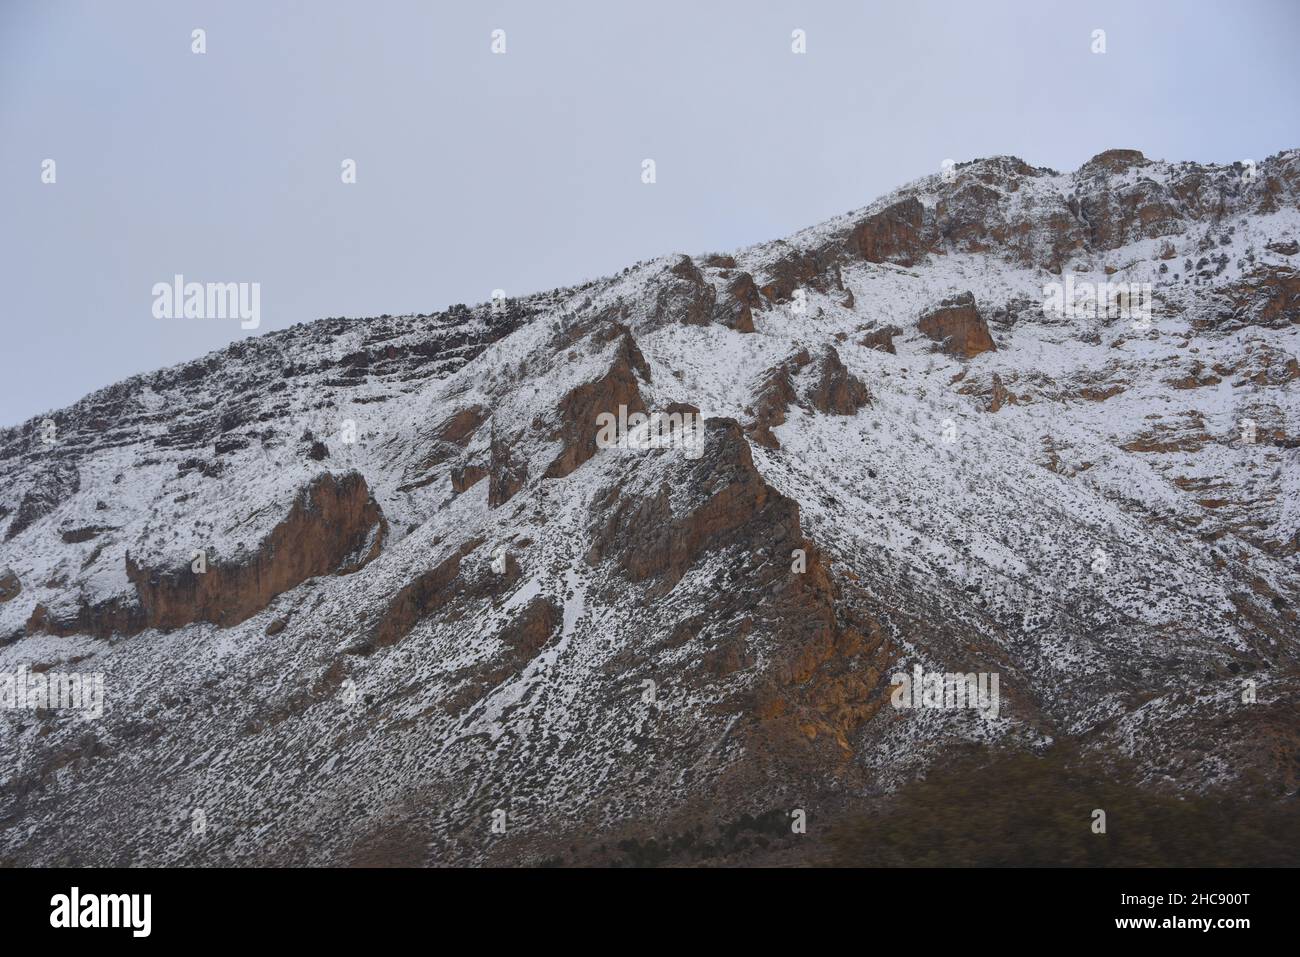 Panorama of a snow storm over the rugged red cliffs of the Utah desert wilderness. Stock Photo